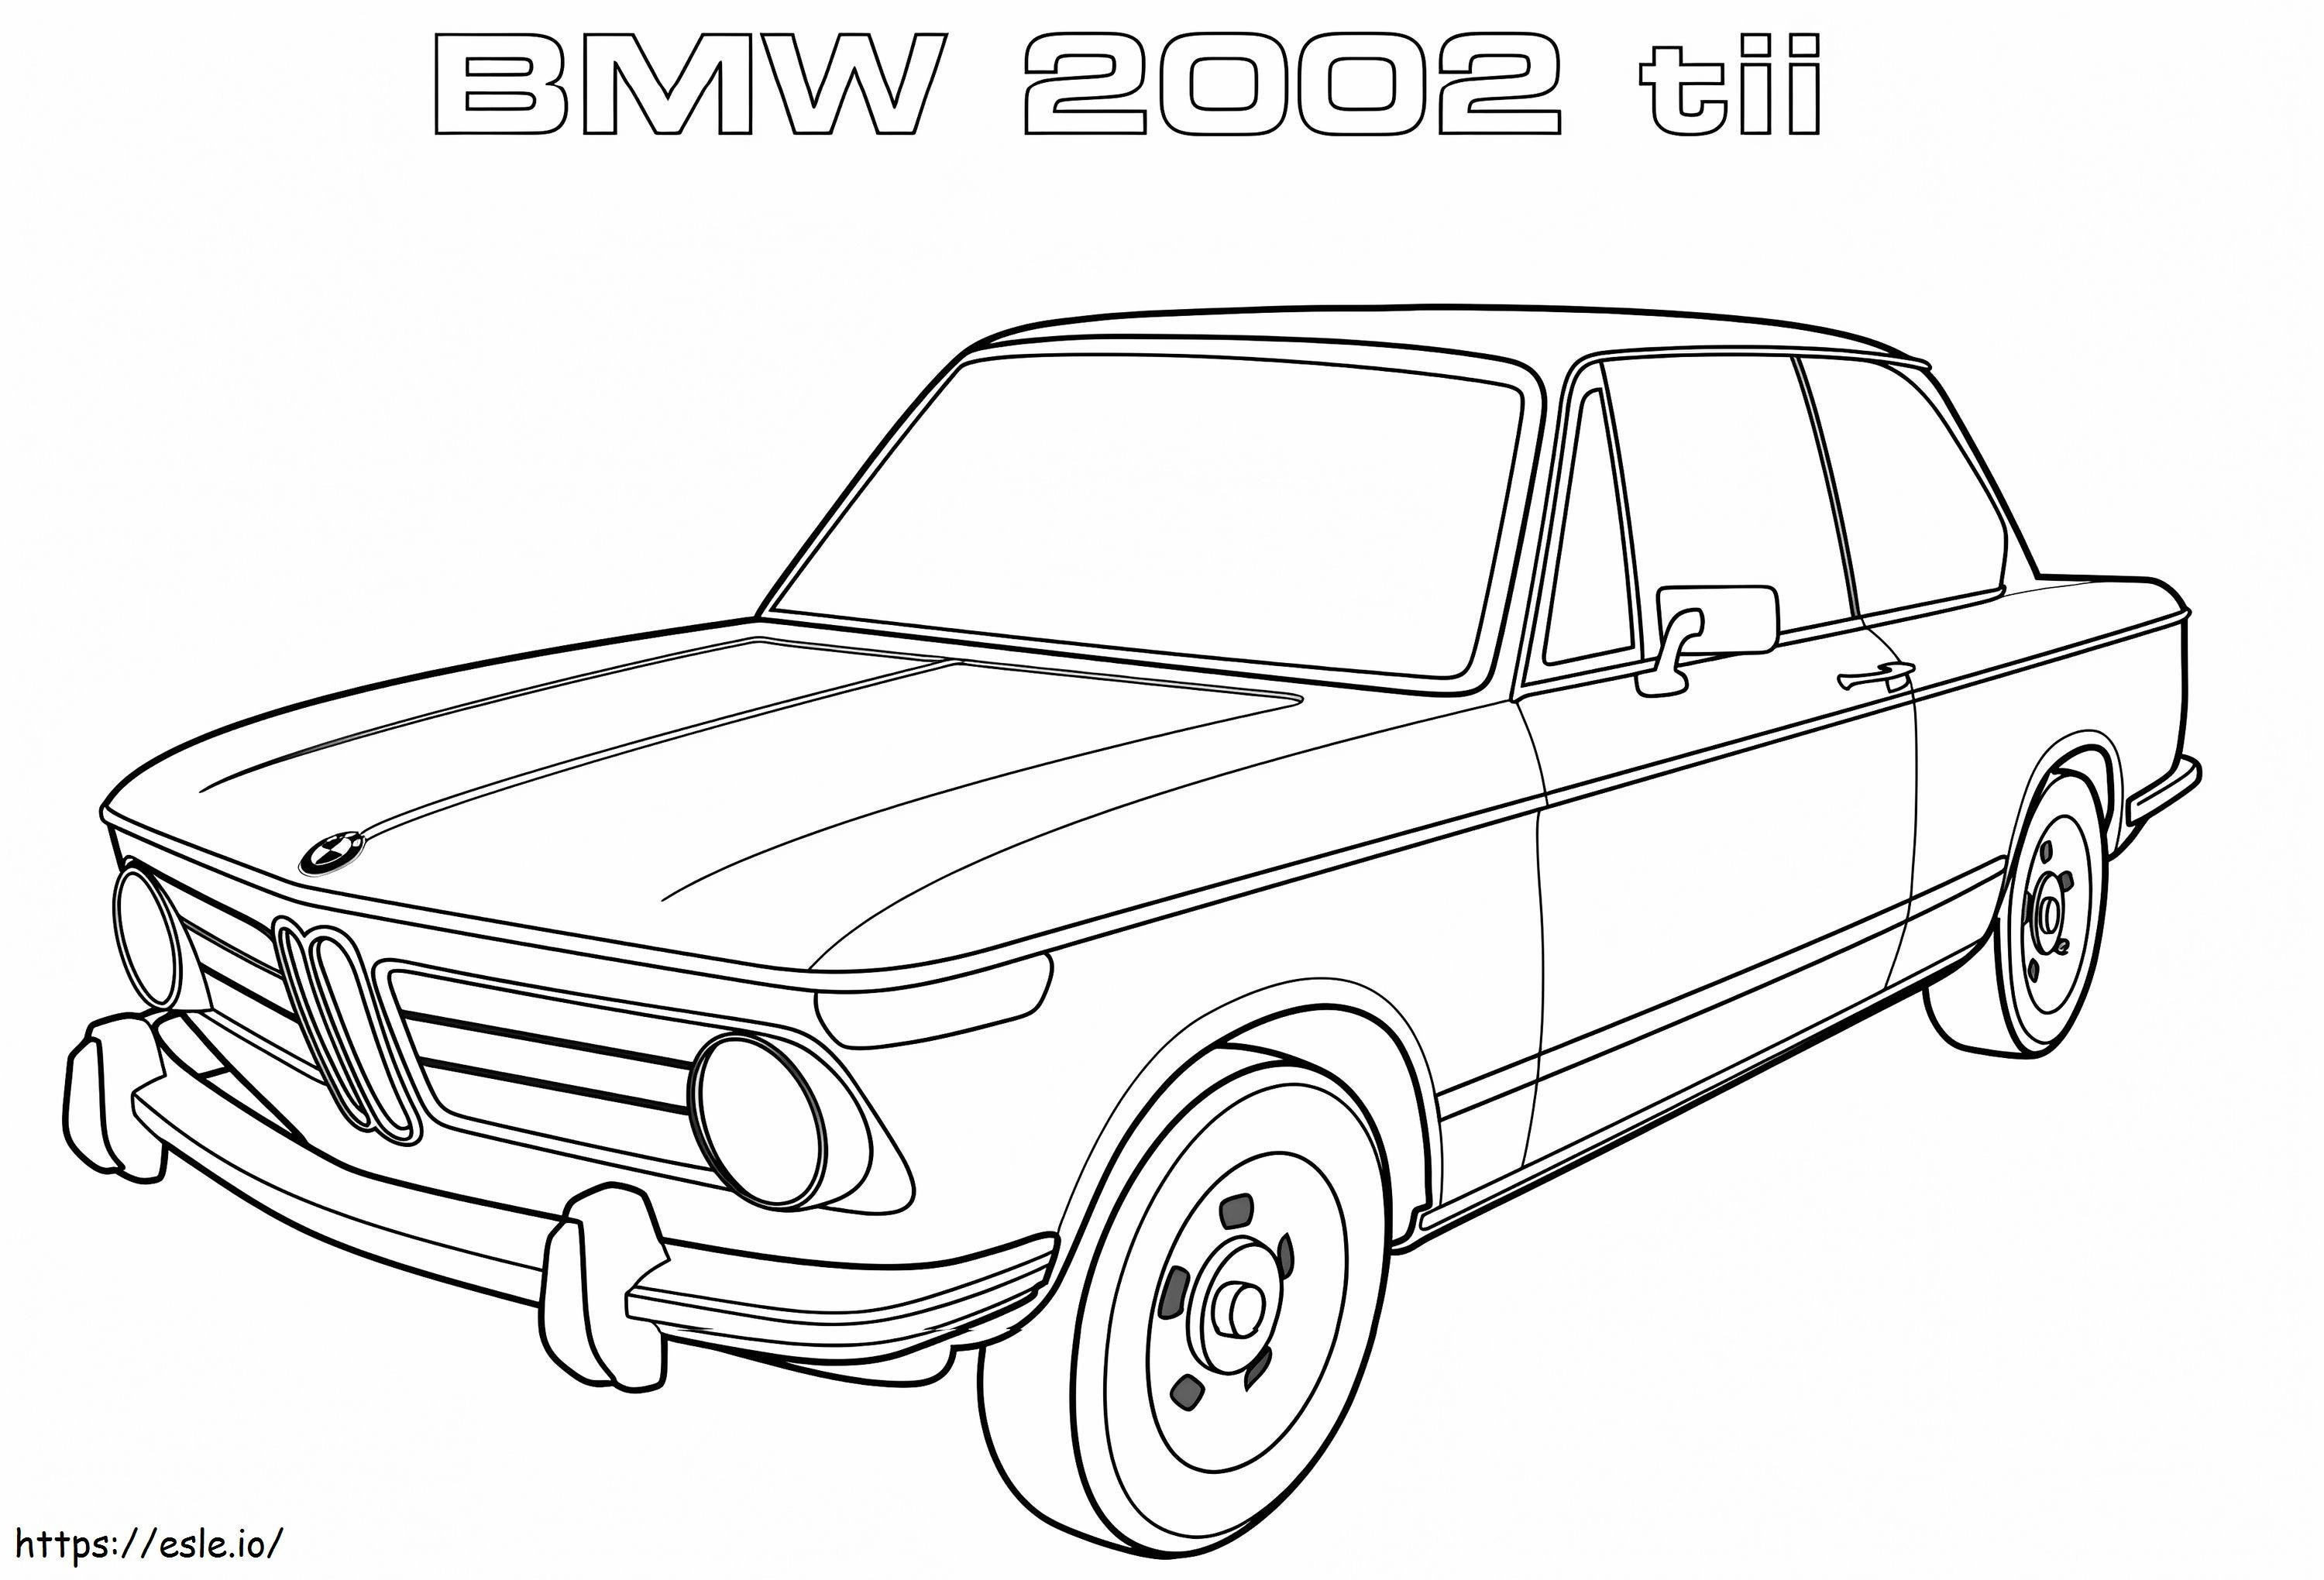 1560764130 1973 Bmw 2002Tii A4 coloring page